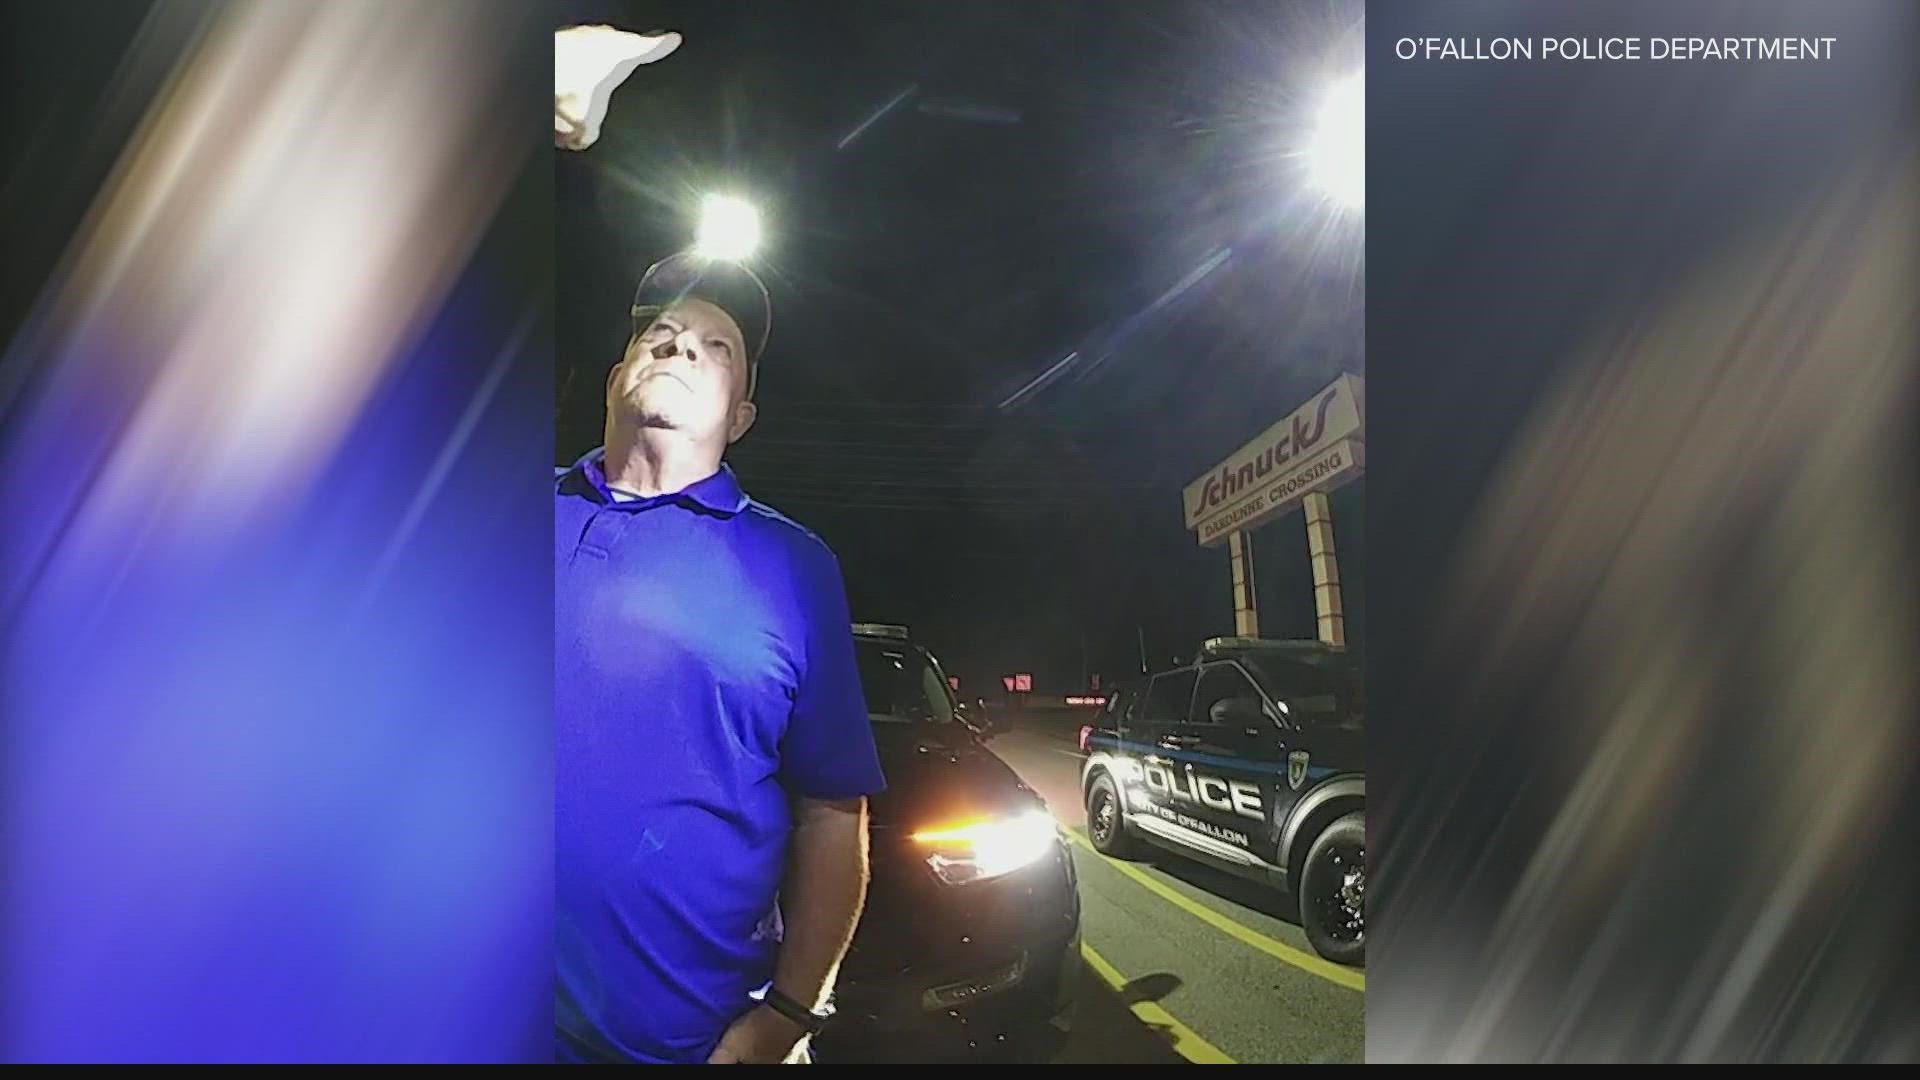 Hazelwood Police Chief Gregg Hall visibly failed three sobriety tests during a traffic stop by an O'Fallon officer on May 28. He was not arrested.